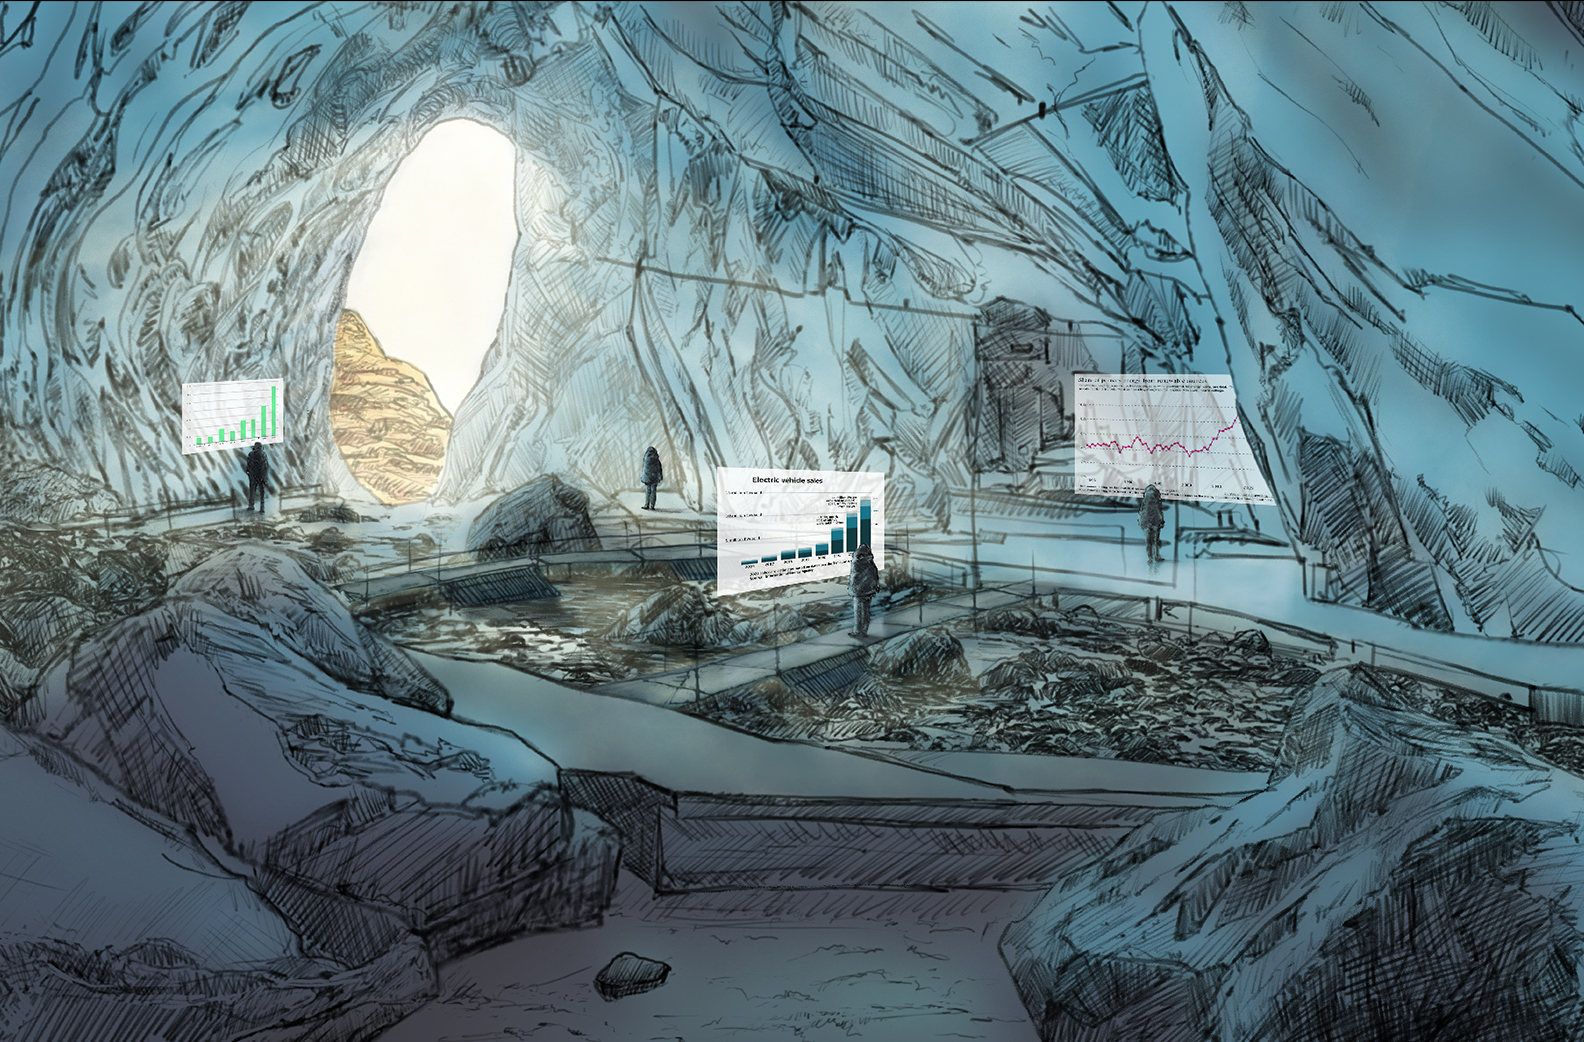 An artist's sketch in what appears to be ink and watercolor, of an ice cave that is also a museum.